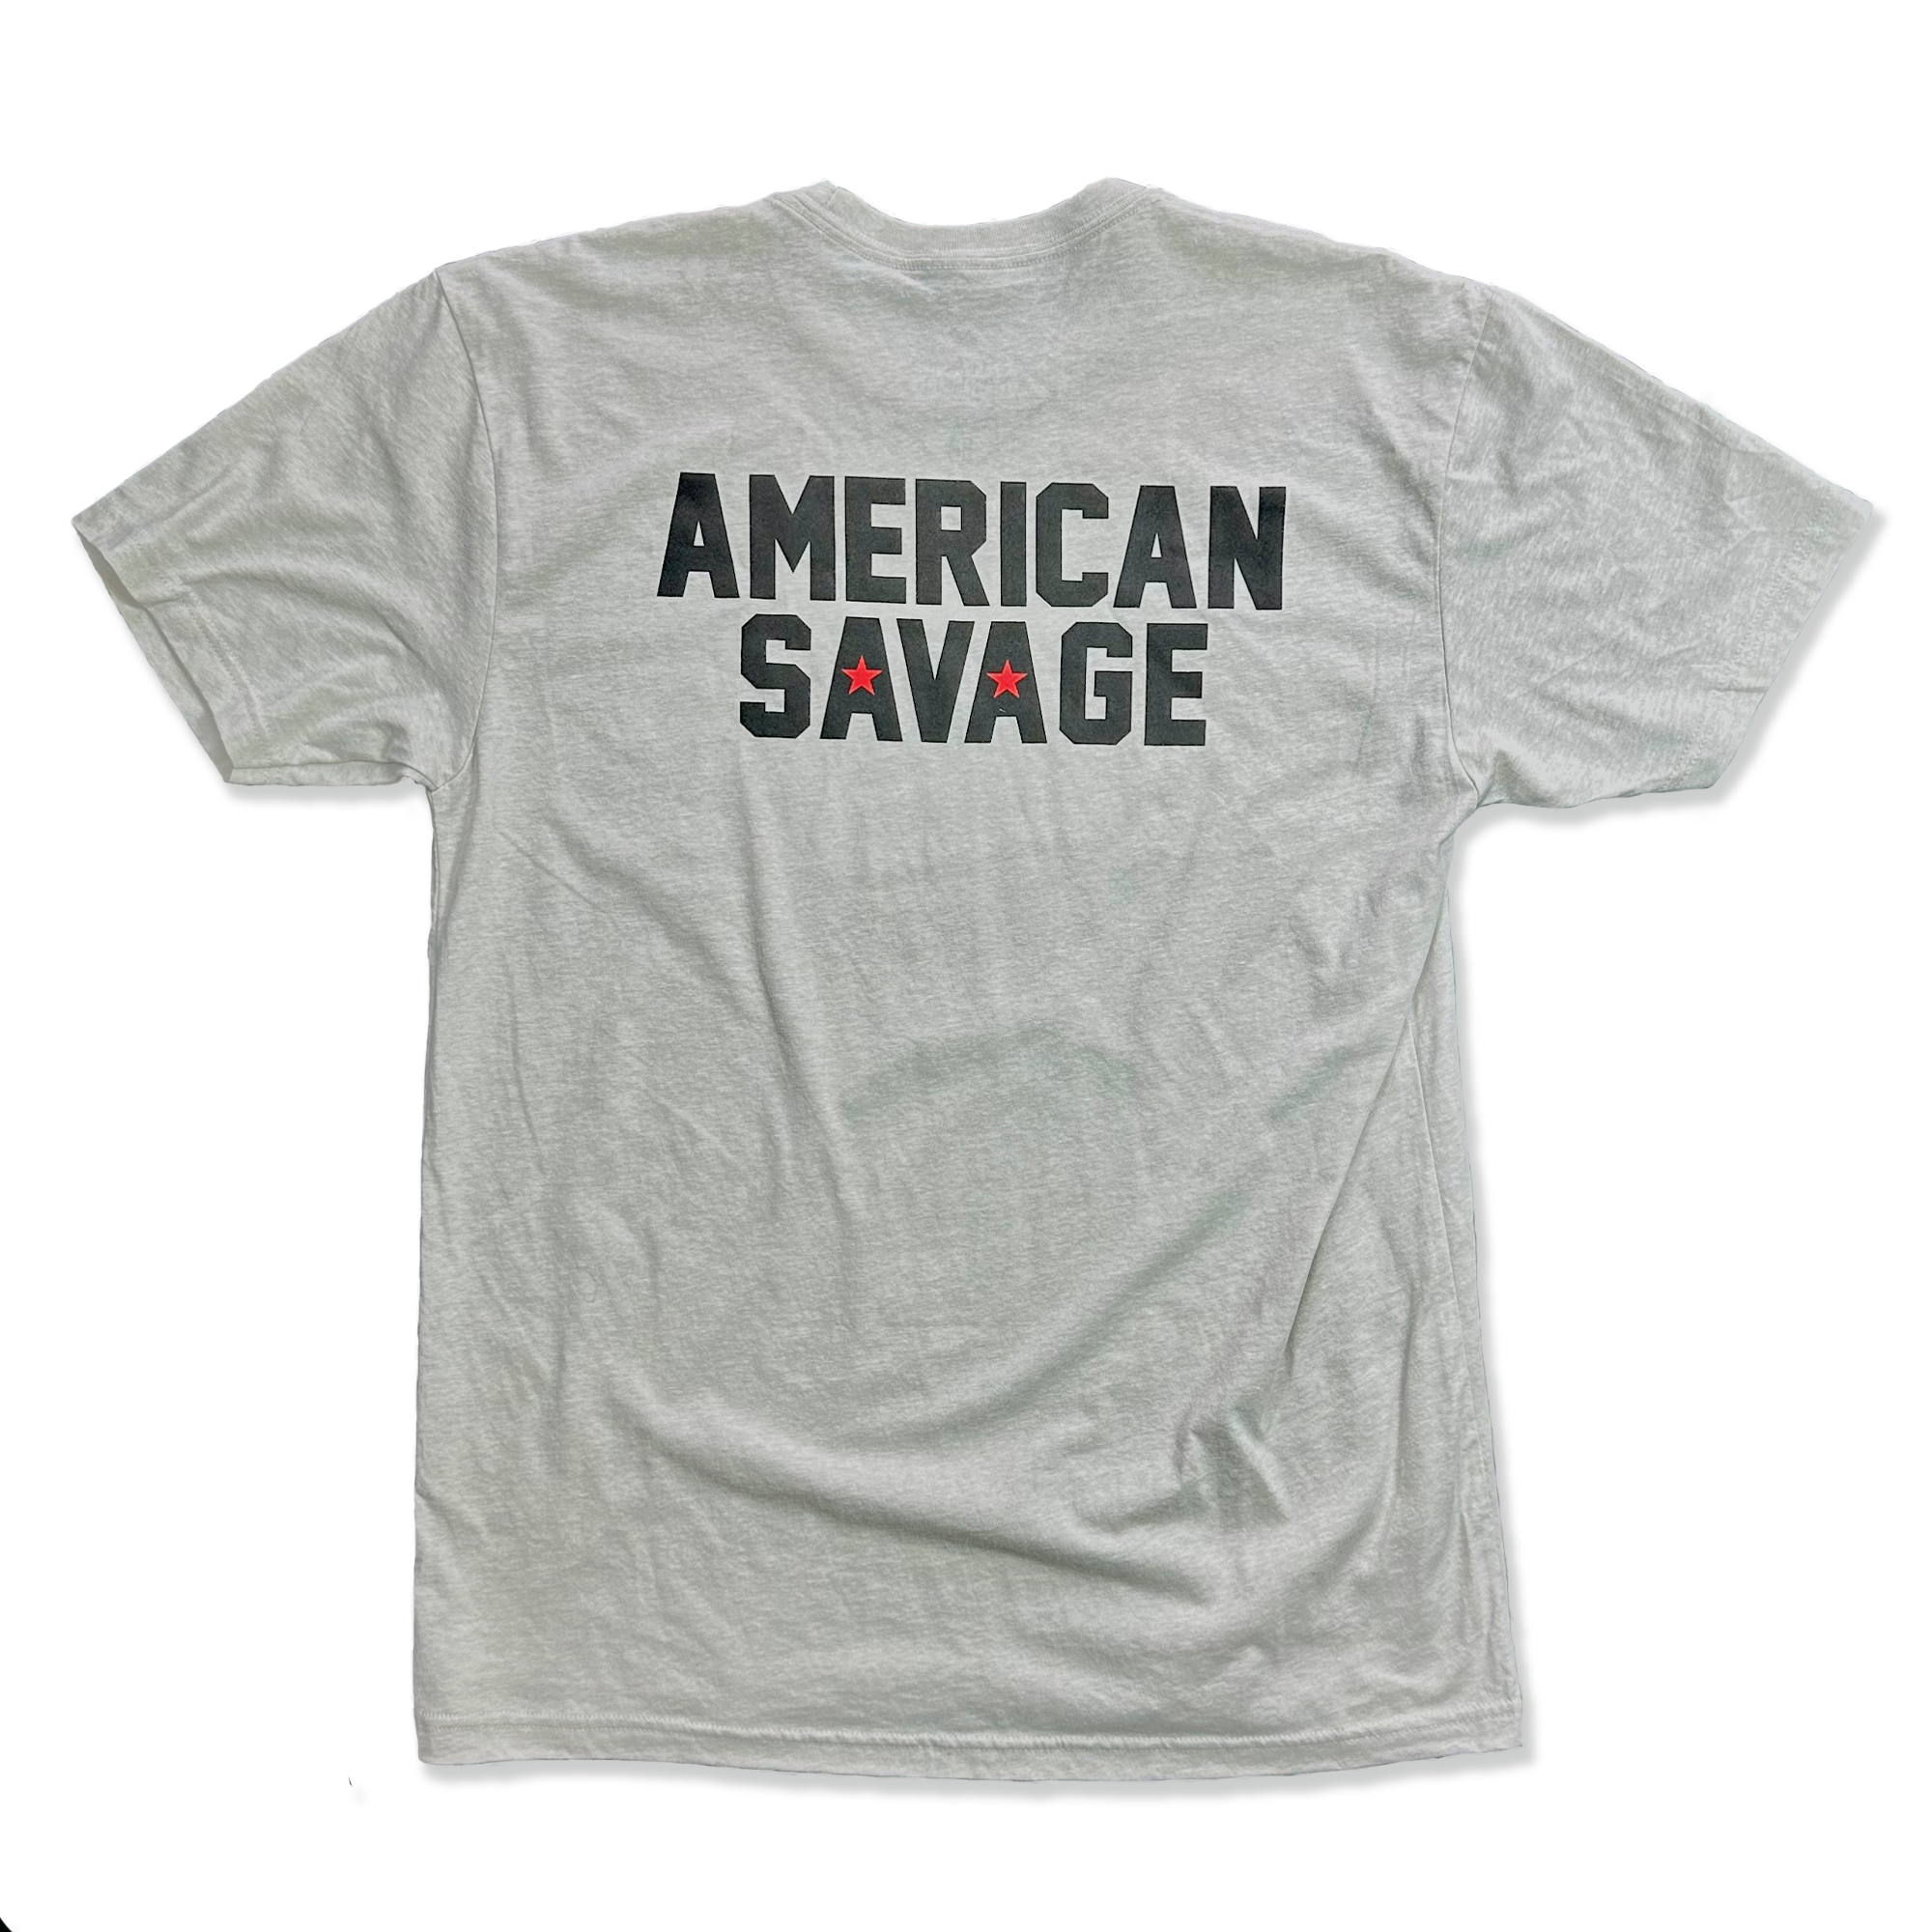 Men's T-shirt - "Limited Edition" American Savage - Savage Barbell Apparel